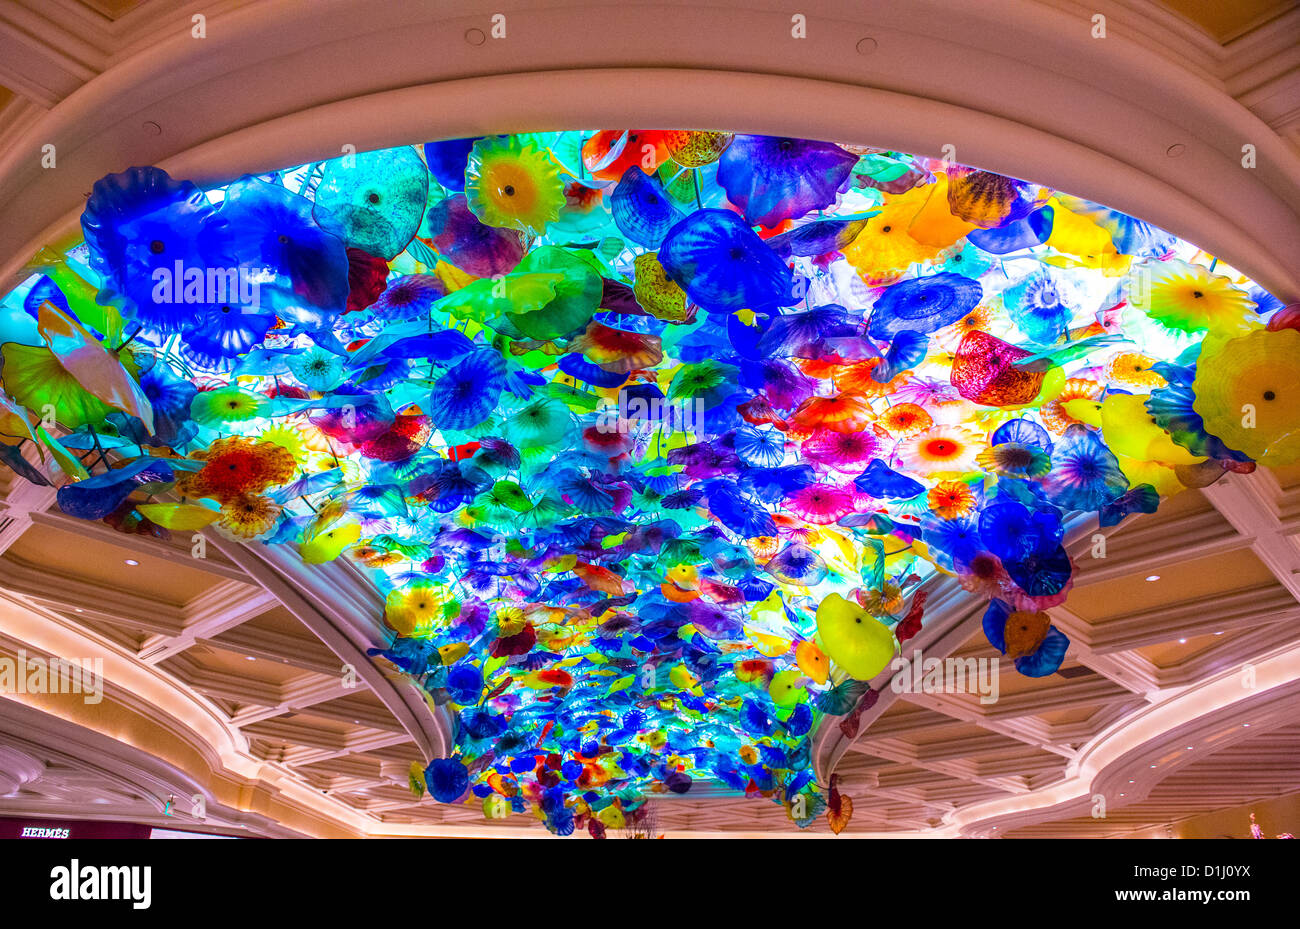 The Hand Blown Glass Flower Ceiling At The Bellagio Hotel Stock